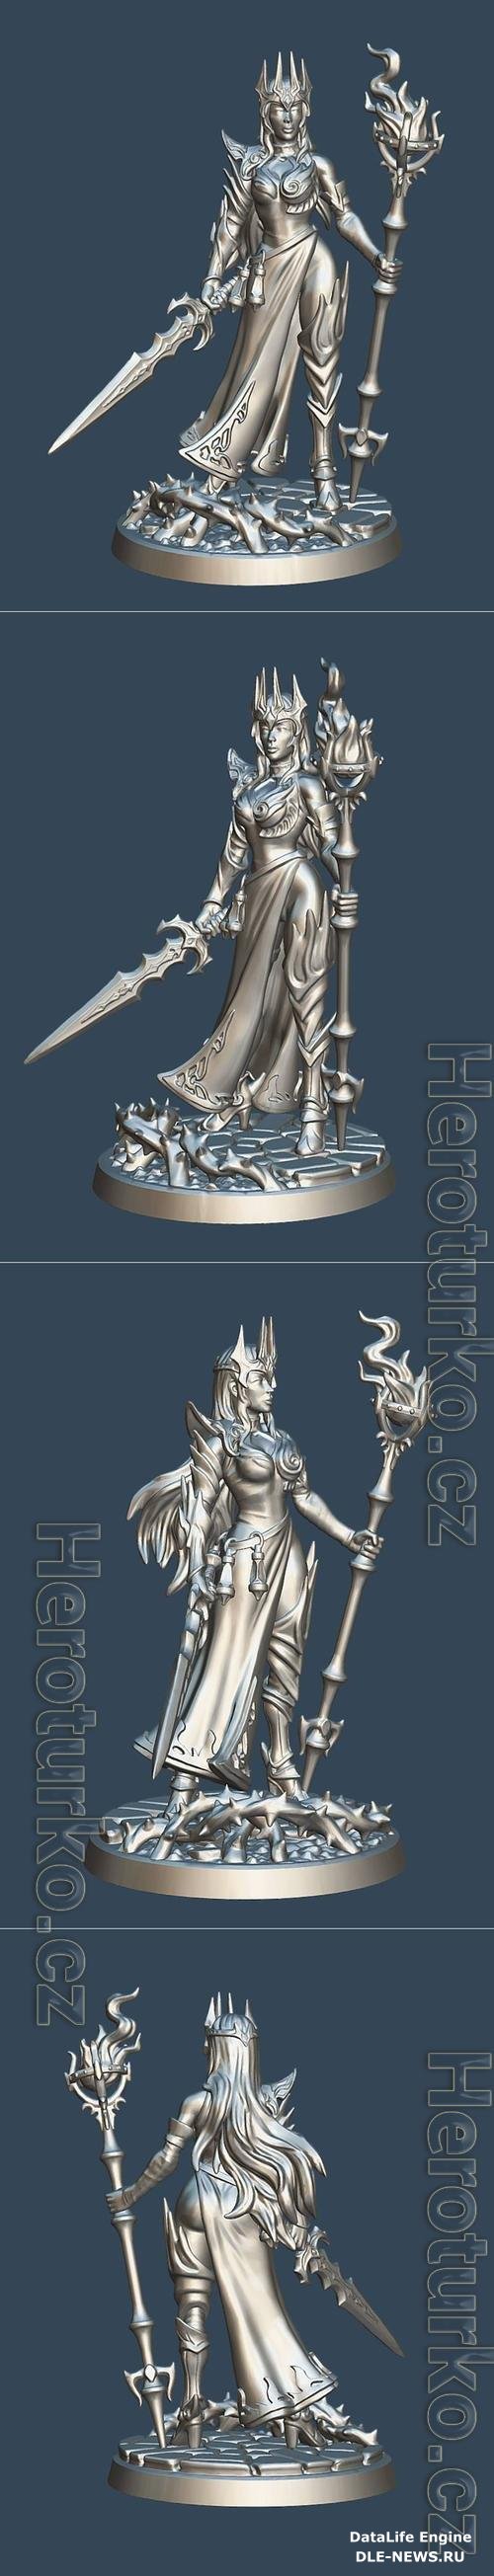 Fire Witch 3D Print Model